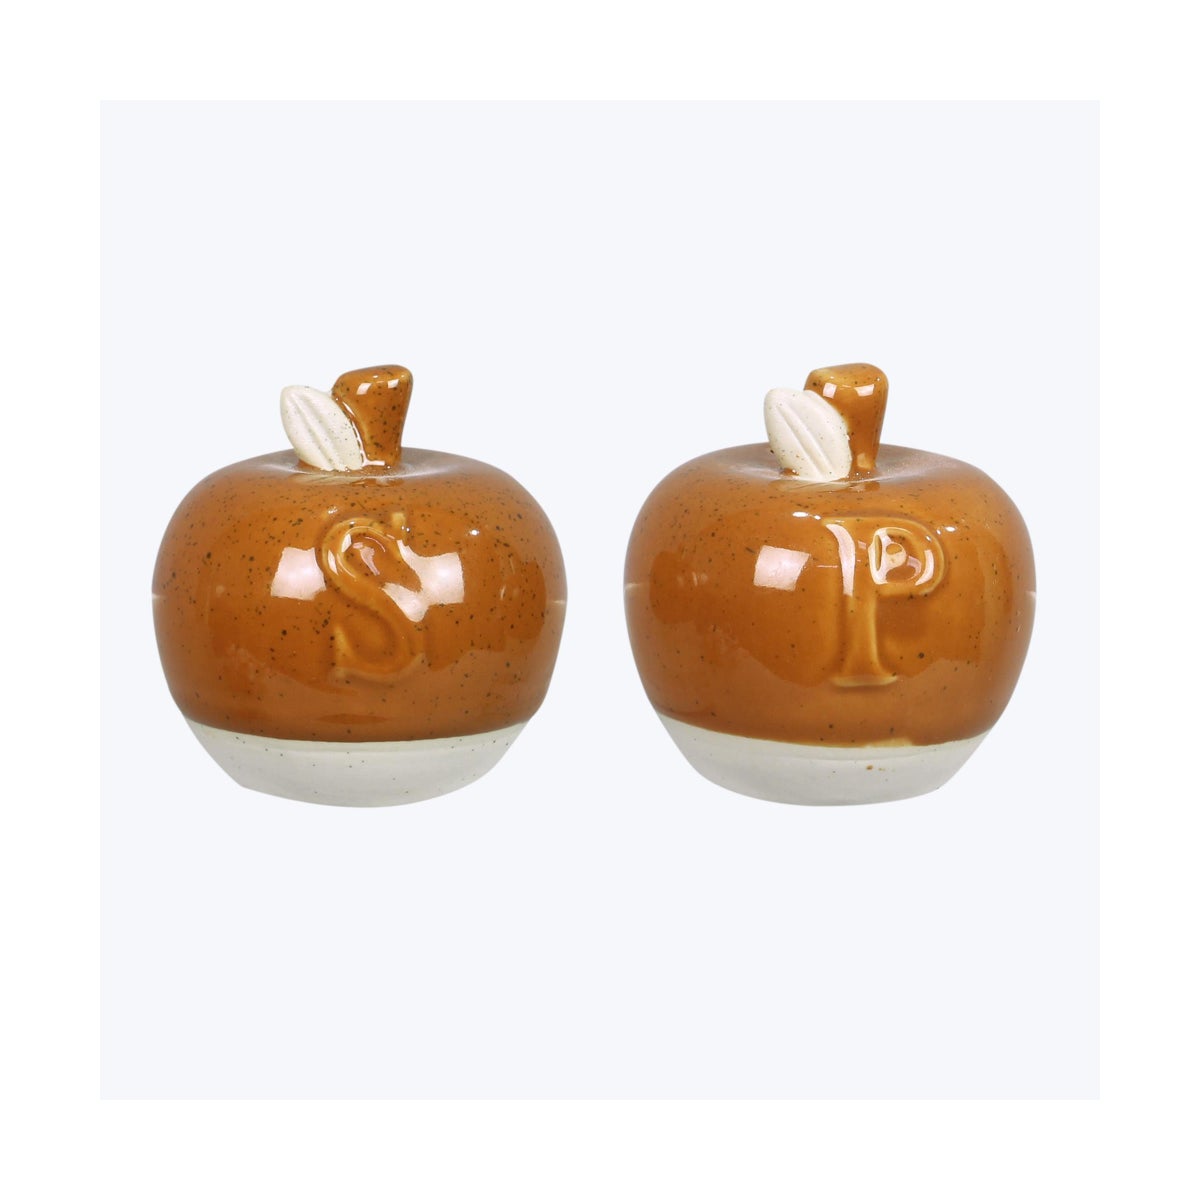 Ceramic Fall Tradition Apple Shaped S/P Set of 2